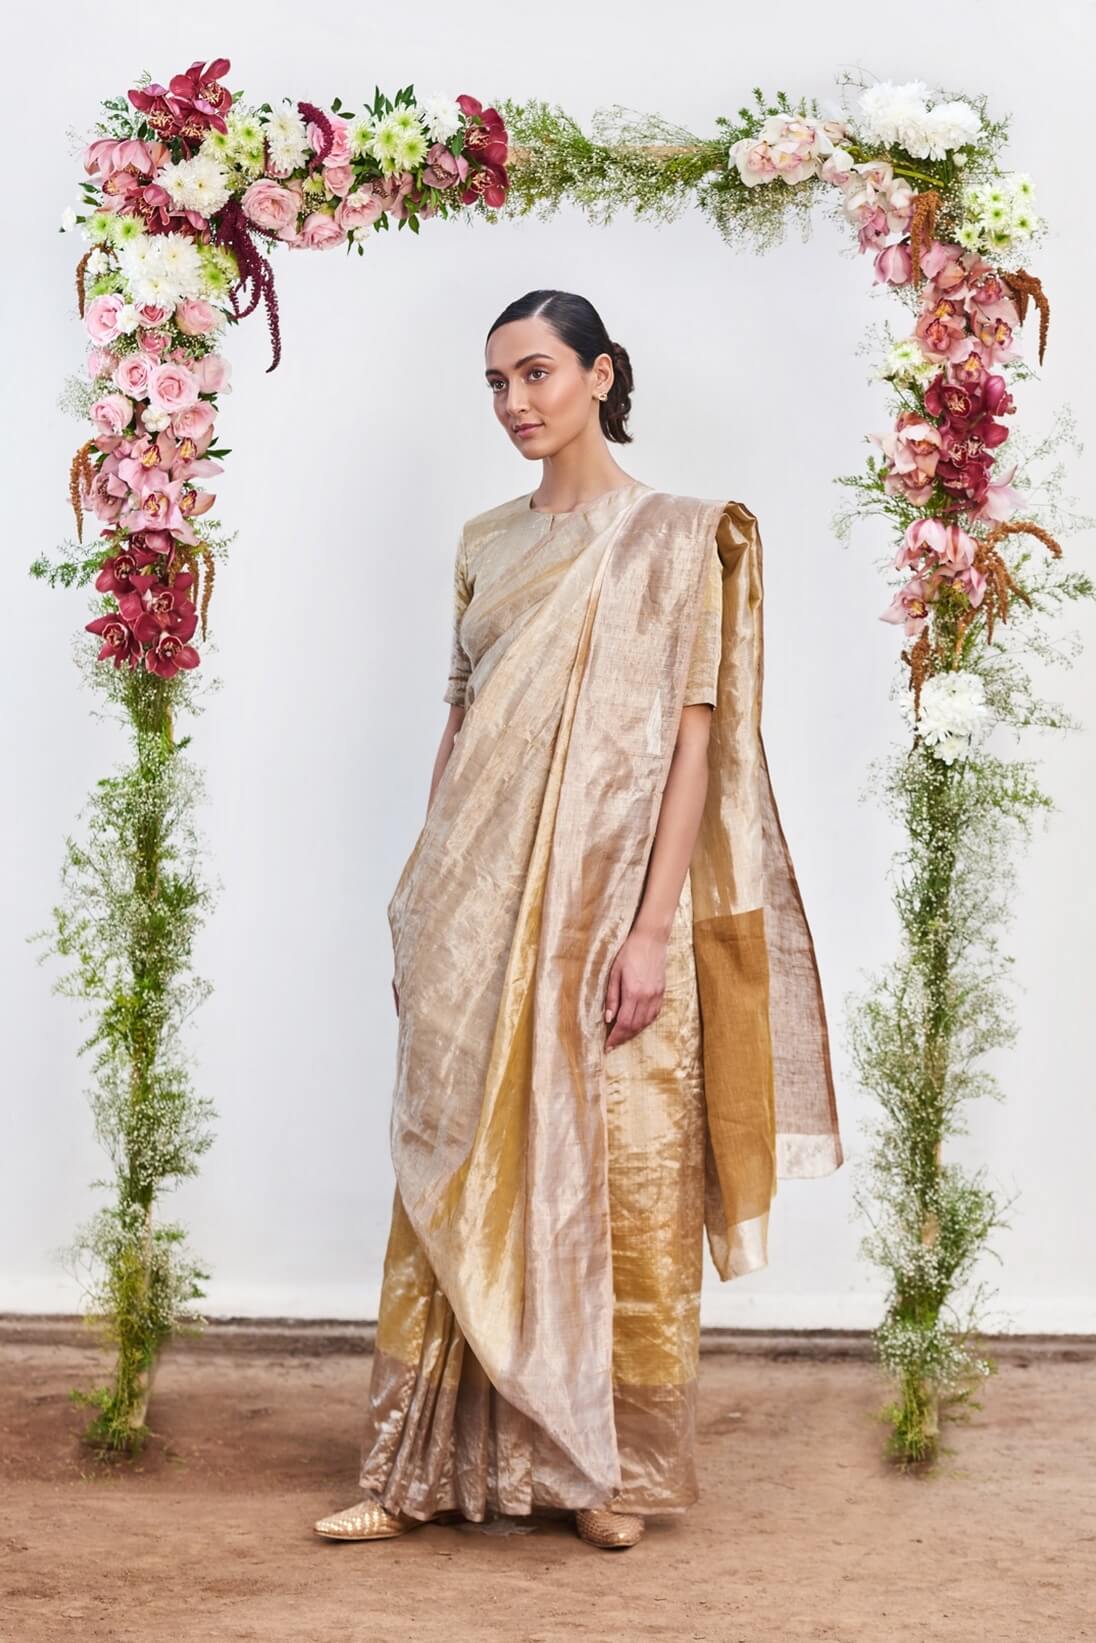 Metallic Silver With Gold Border Tissue Silk Solid Weave Saree And Con -  House of Begum's